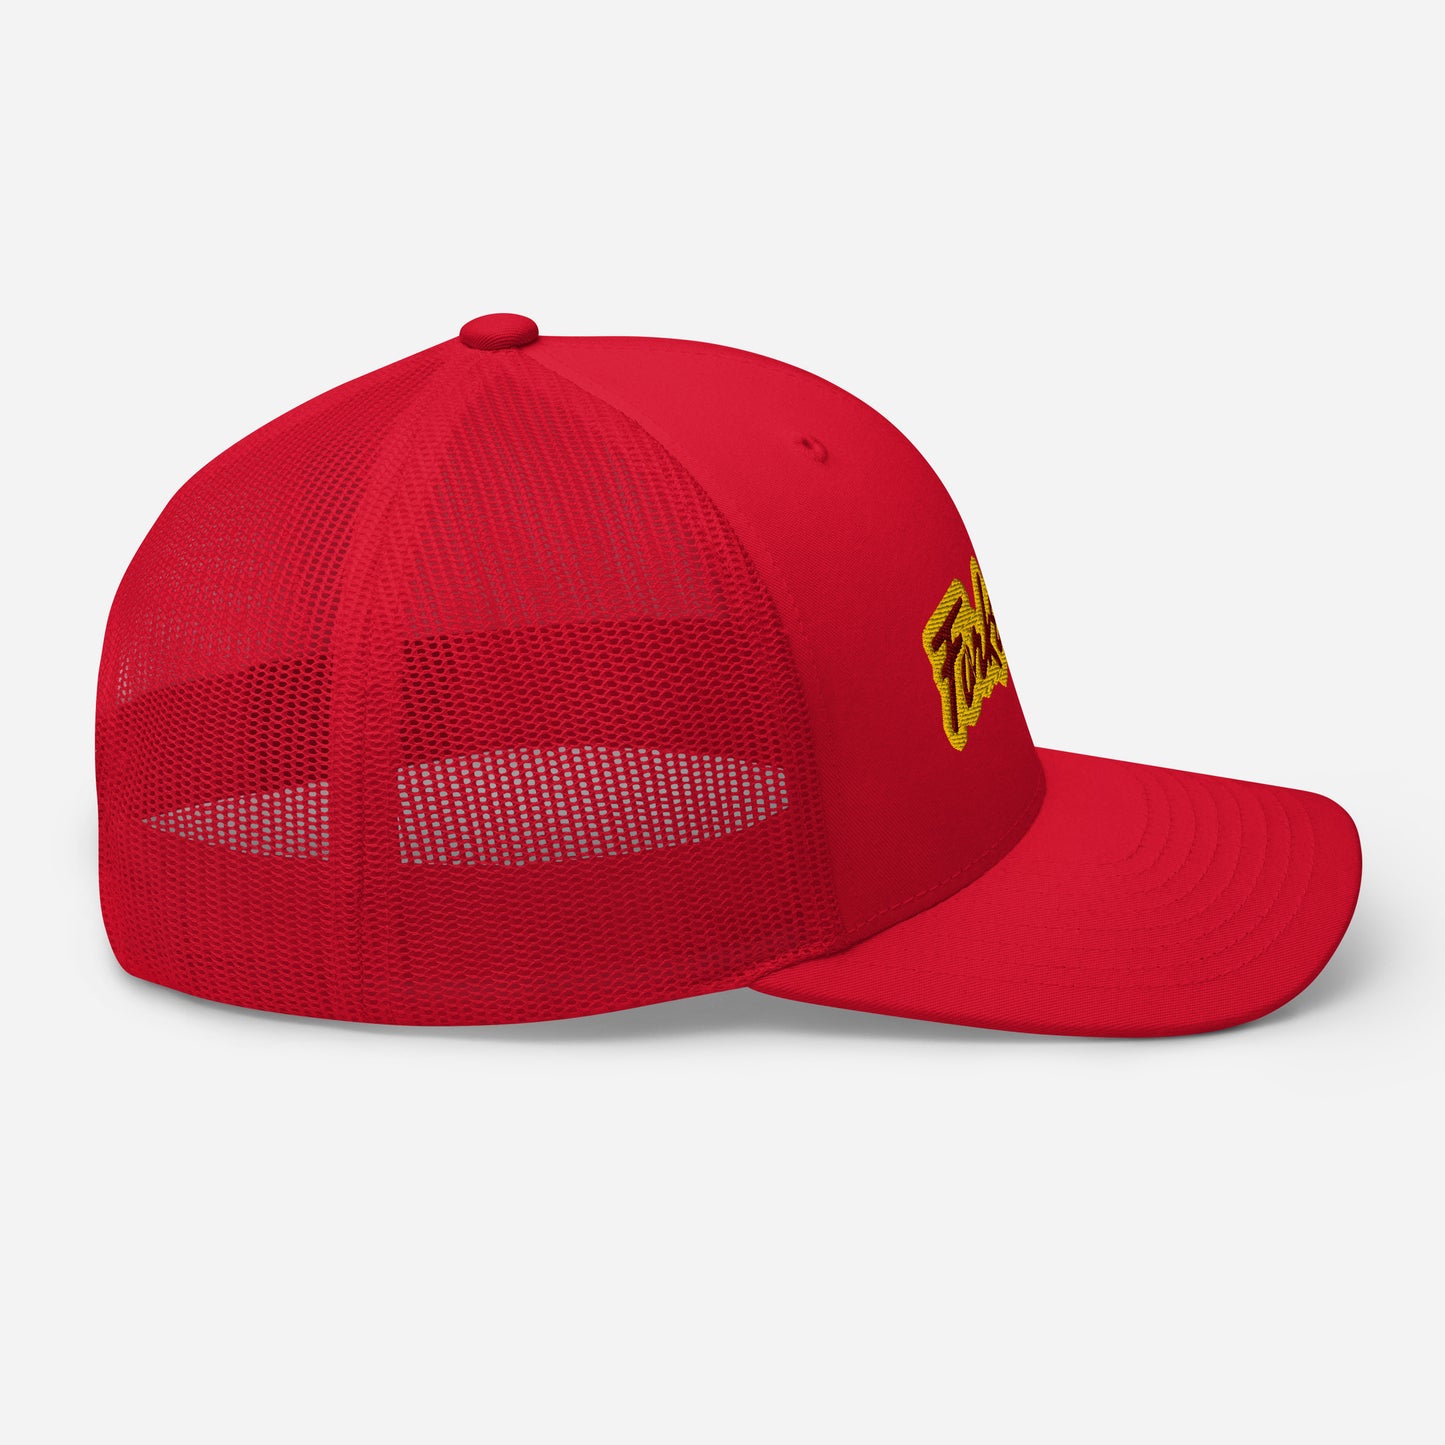 Forked Up Trucker Hat